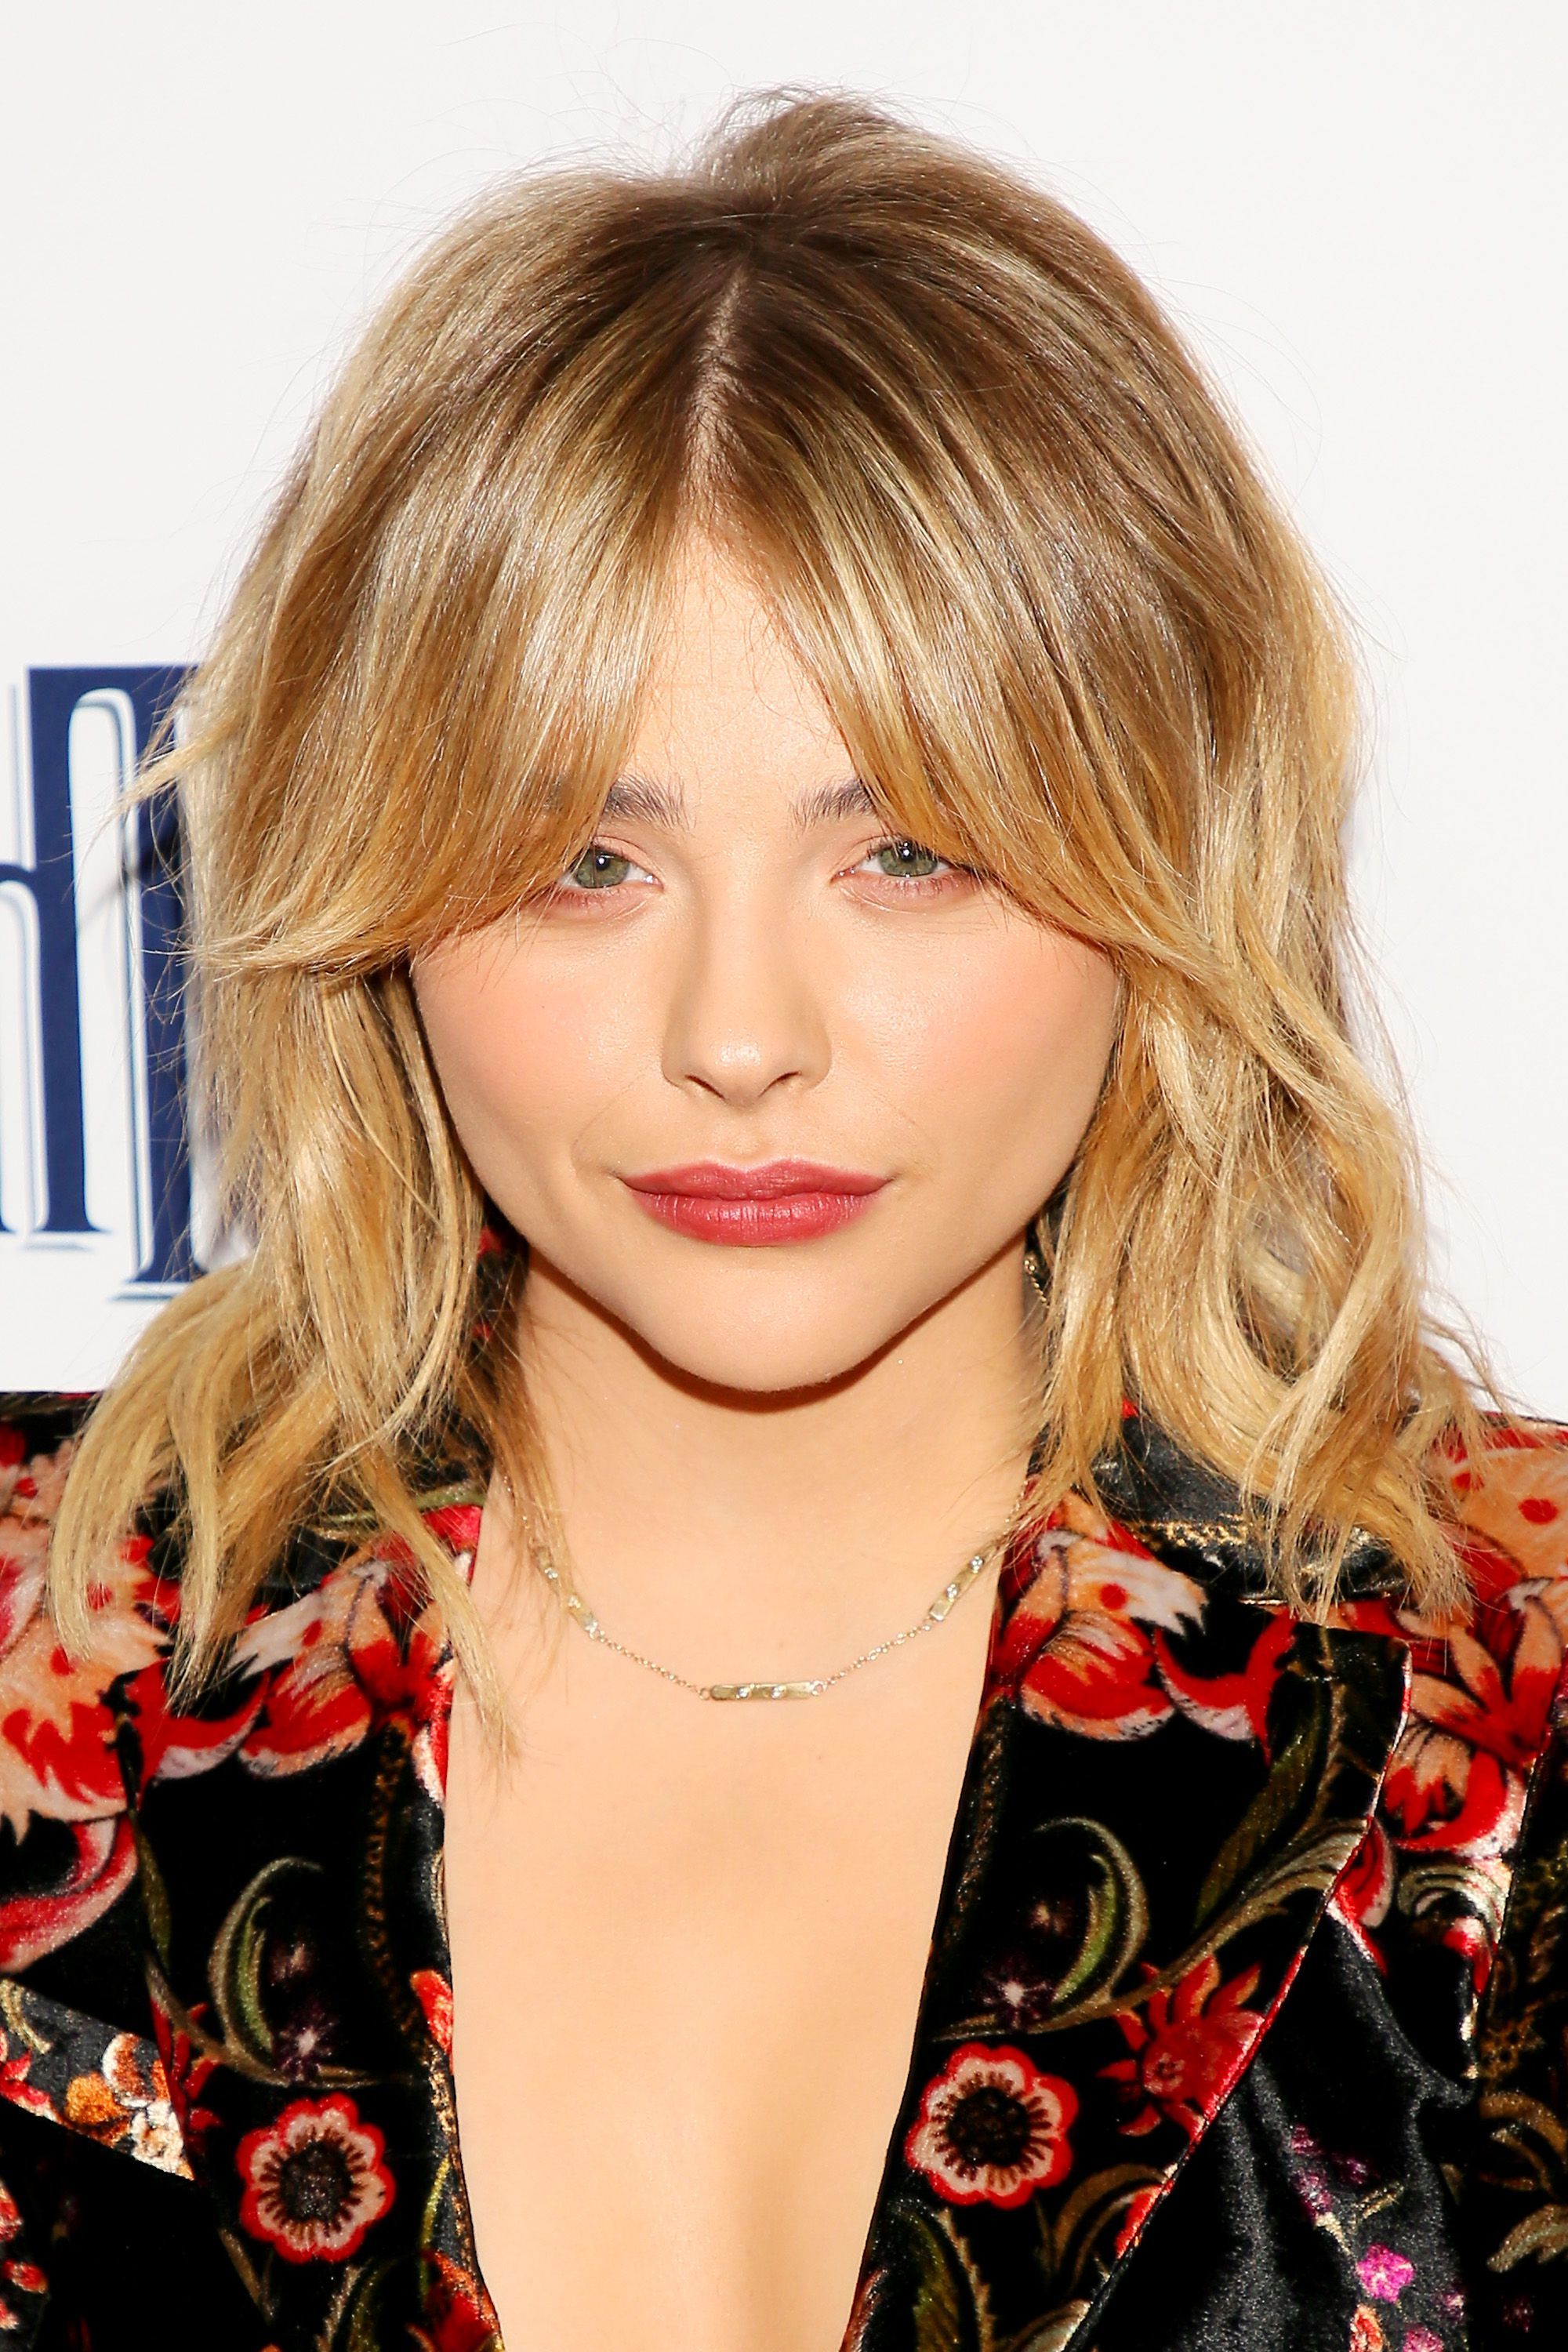 112 Hairstyles With Bangs You'll Want To Copy – Celebrity Haircuts Inside Short Haircuts With Side Bangs (View 20 of 25)